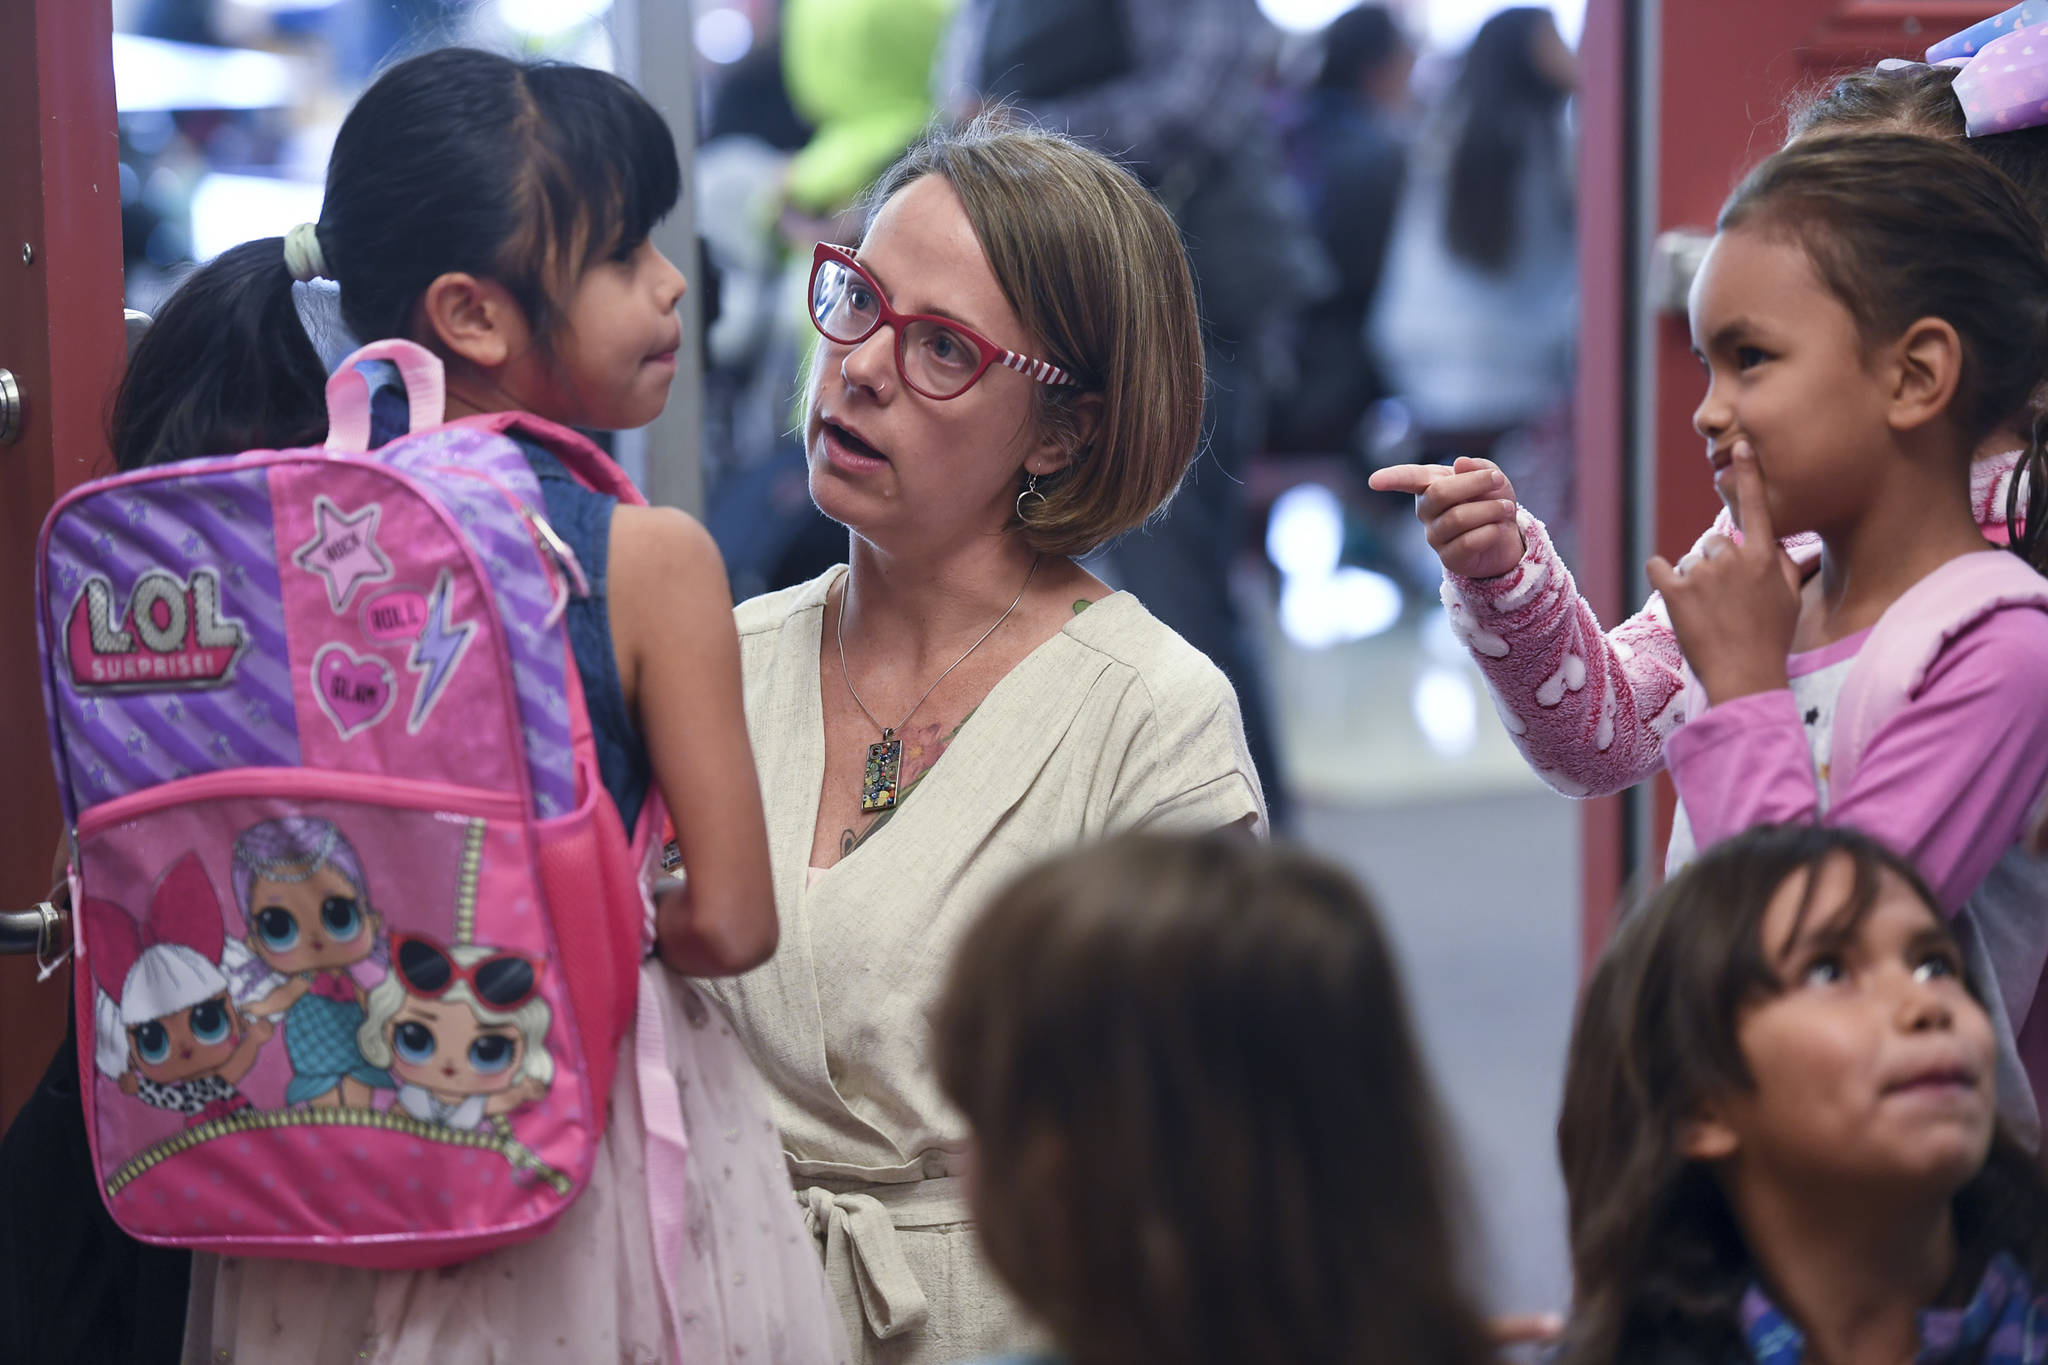 Elizabeth Pisel-Davis, Principal of Riverbend Elementary School, helps students arriving for the first day of school on Monday, Aug. 19, 2019. (Michael Penn | Juneau Empire)